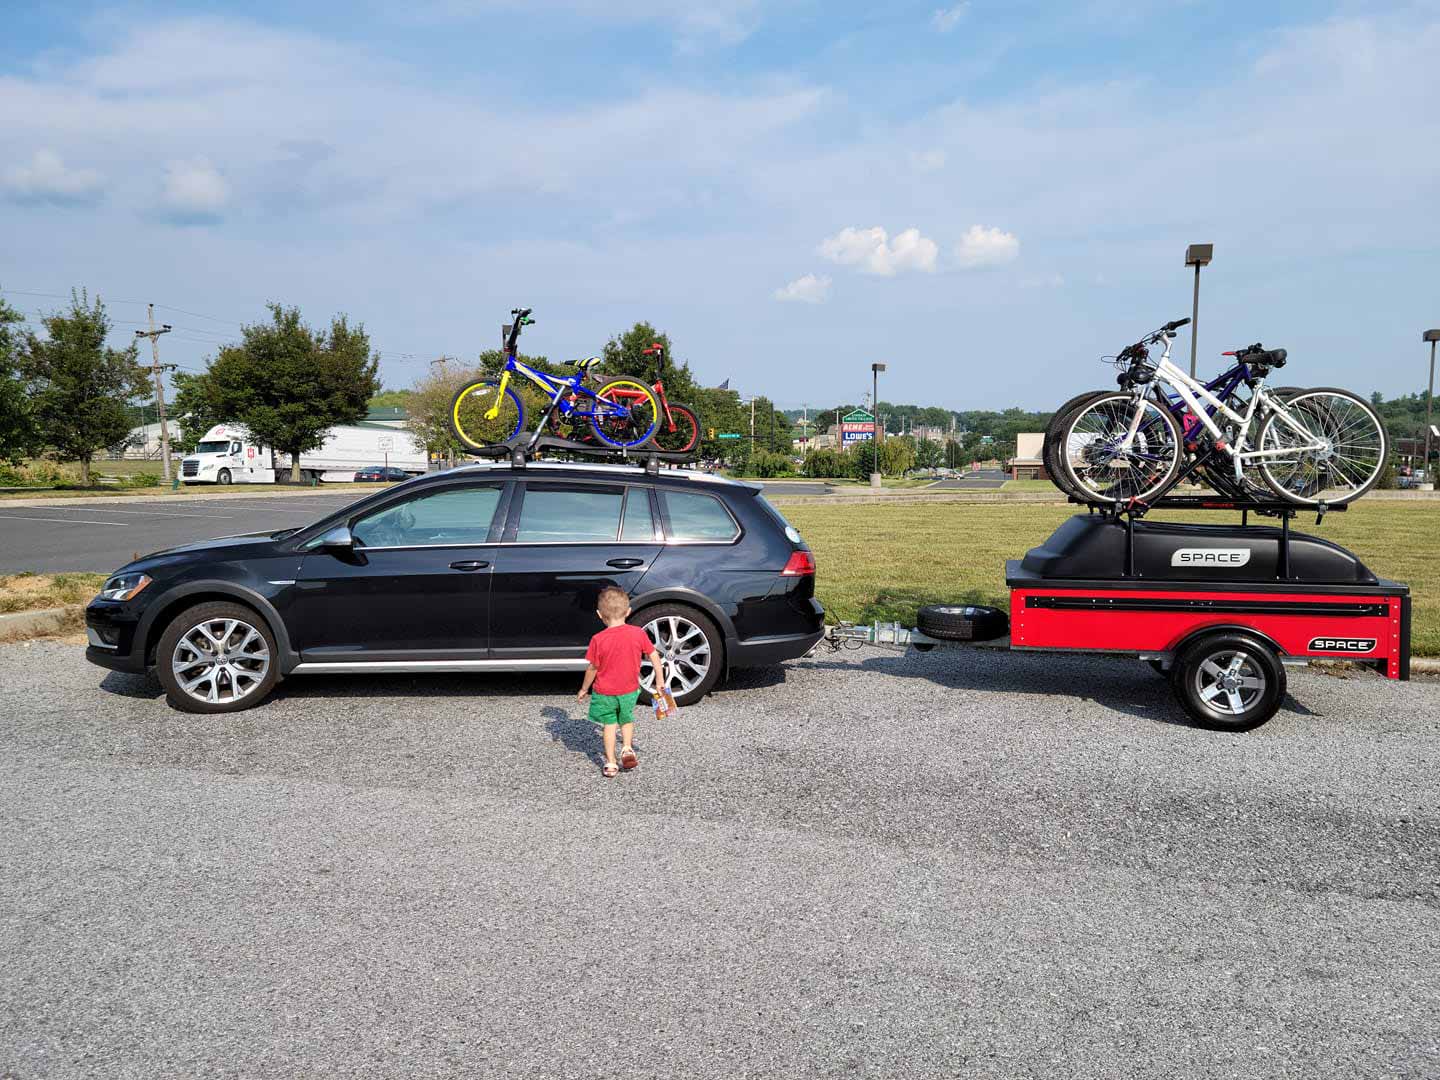 Red space trailer with bikes for family trip